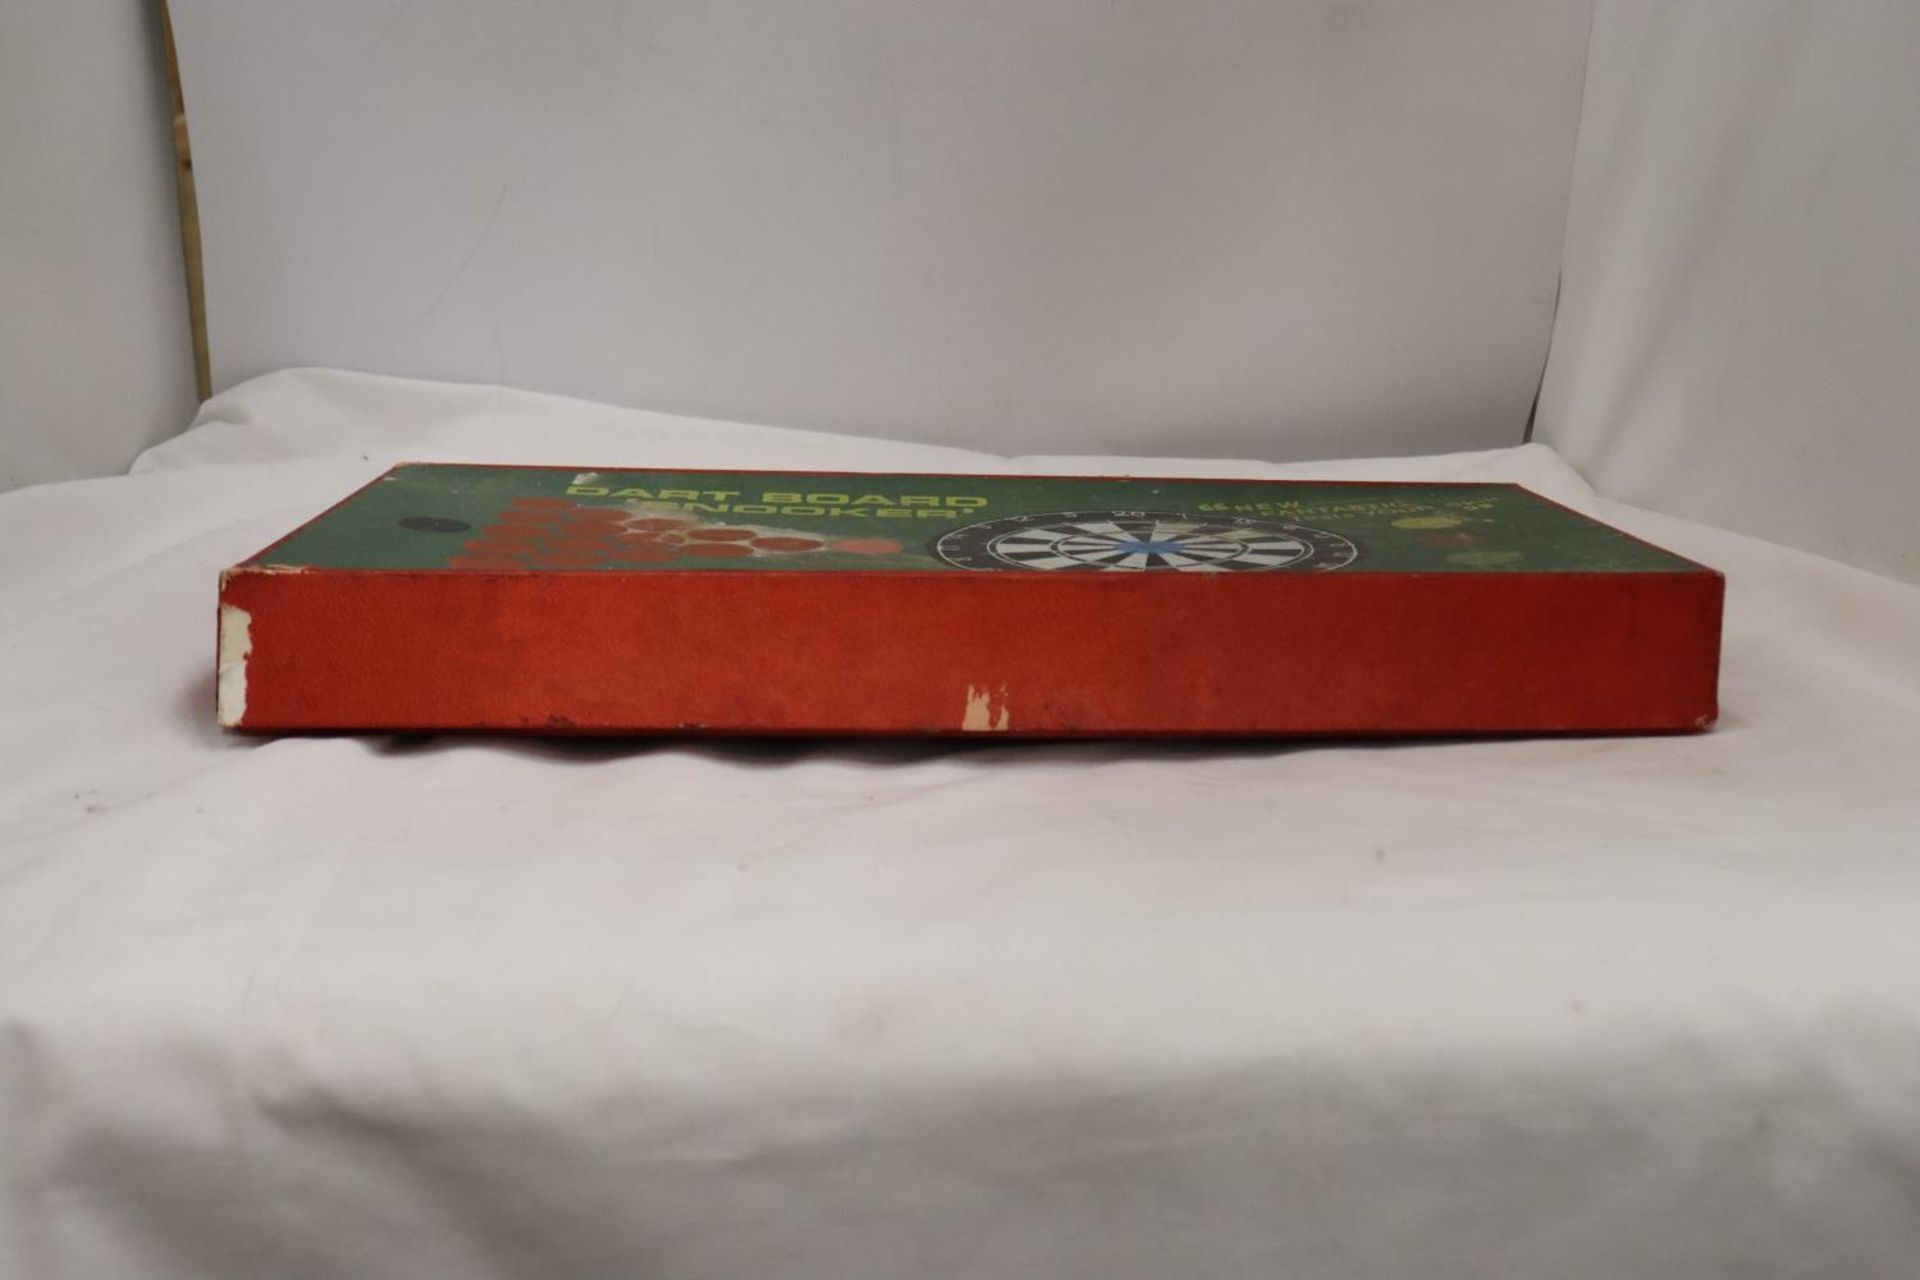 A RARE VINTAGE BOXED DART BOARD SNOOKER GAME - Image 6 of 6